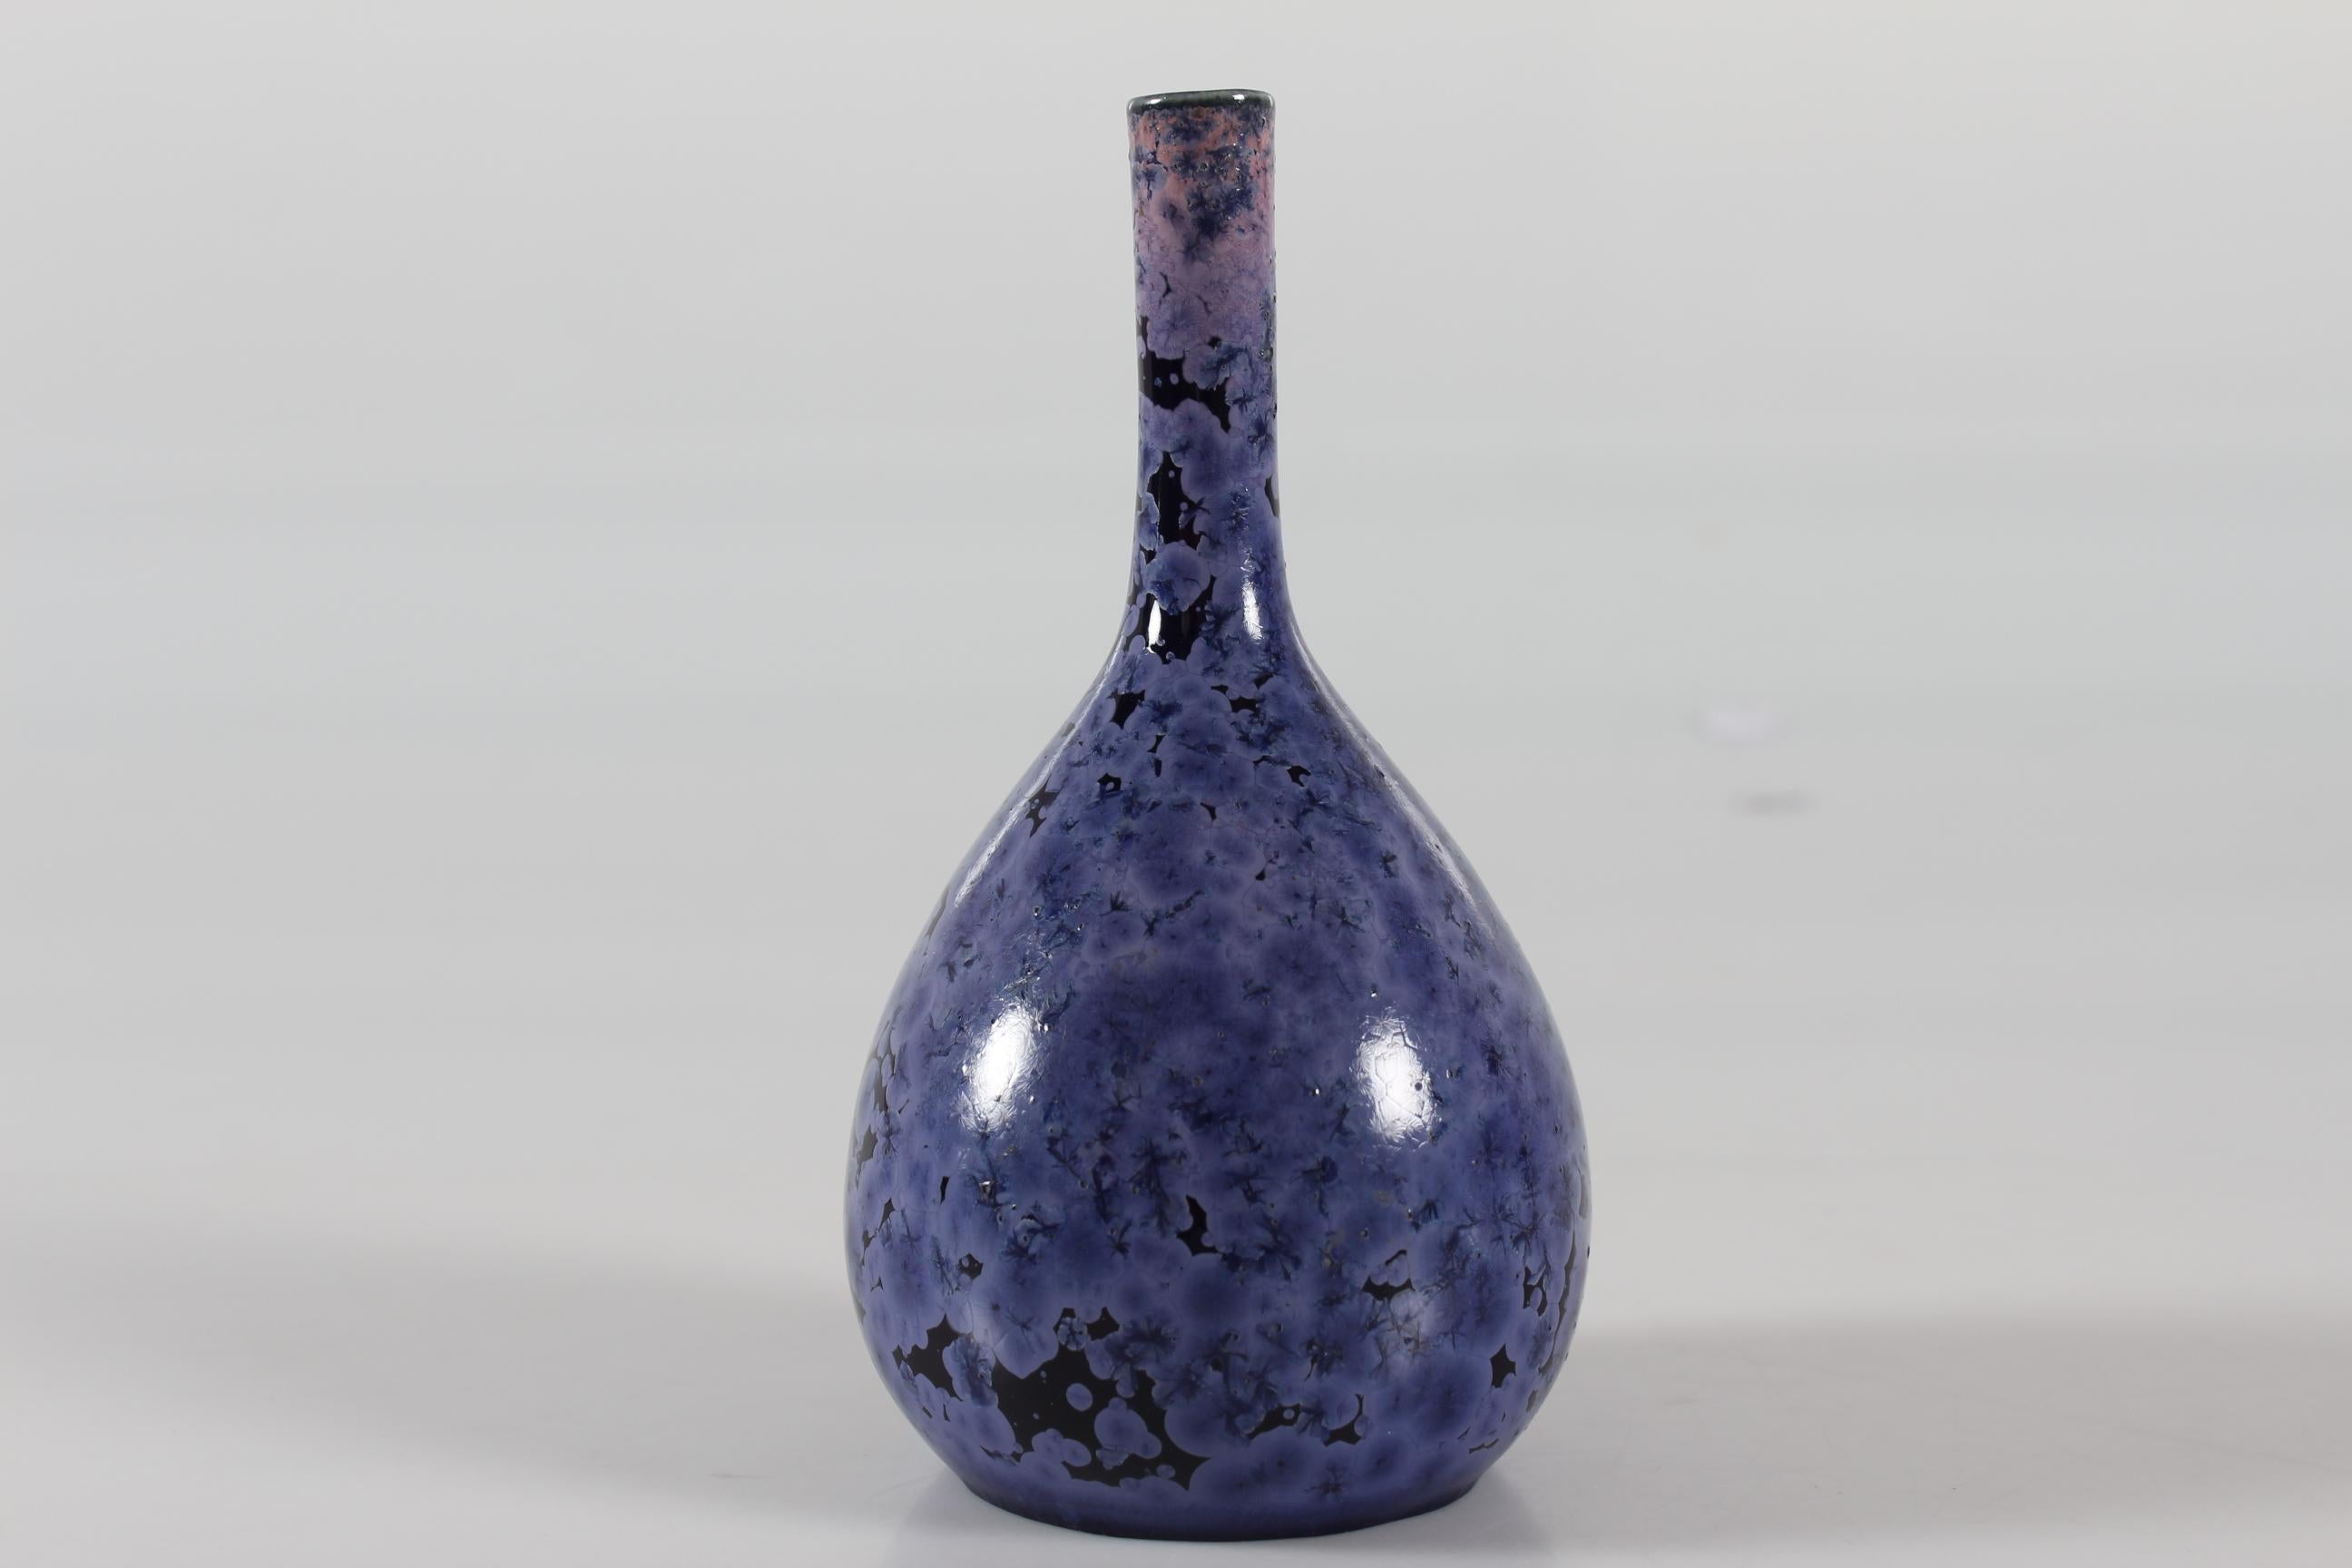 Drop-shaped vase with slender slim neck designed by Holger Busch Jensen for the Danish porcelain manufacturer Bing & Grøndahl. Made in the beginning of the 20th century.

The vase is glazed with crystal glaze in shades of lilac and purple.

Mint